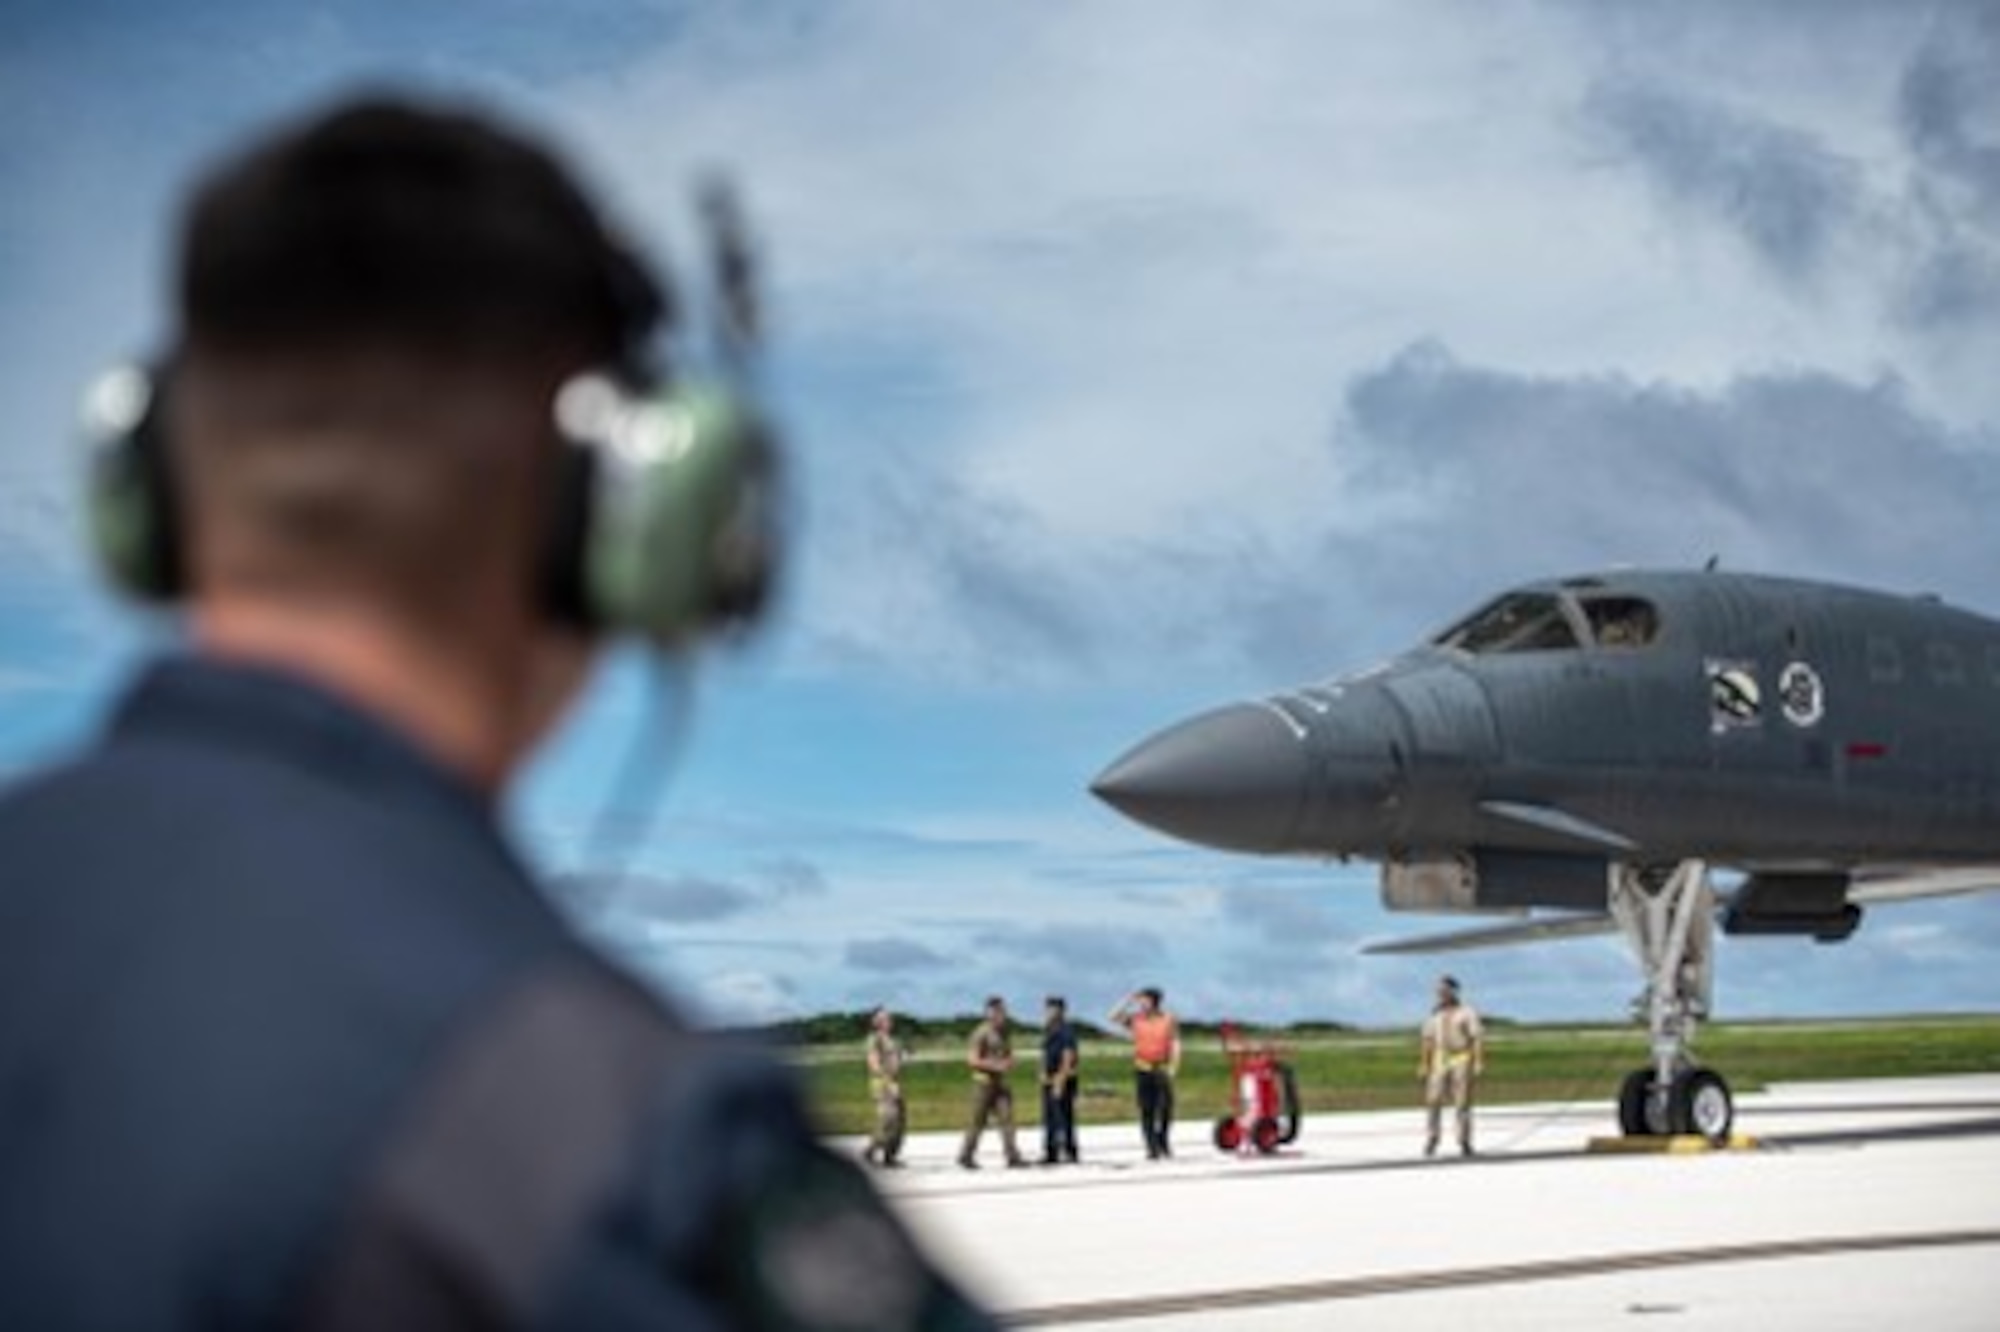 Airmen assigned to the 28th Bomb Wing receive a U.S. Air Force B-1B Lancer assigned to the 37th Expeditionary Bomb Squadron, Ellsworth Air Force Base, South Dakota, at Andersen Air Force Base, Guam, Oct. 18, 2022. Bomber missions contribute to joint force lethality and deter aggression in the Indo-Pacific by demonstrating the U.S. Air Force’s ability to operate anywhere in the world at any time in support of the National Defense Strategy. (U.S. Air Force photo by Senior Airman Yosselin Campos)